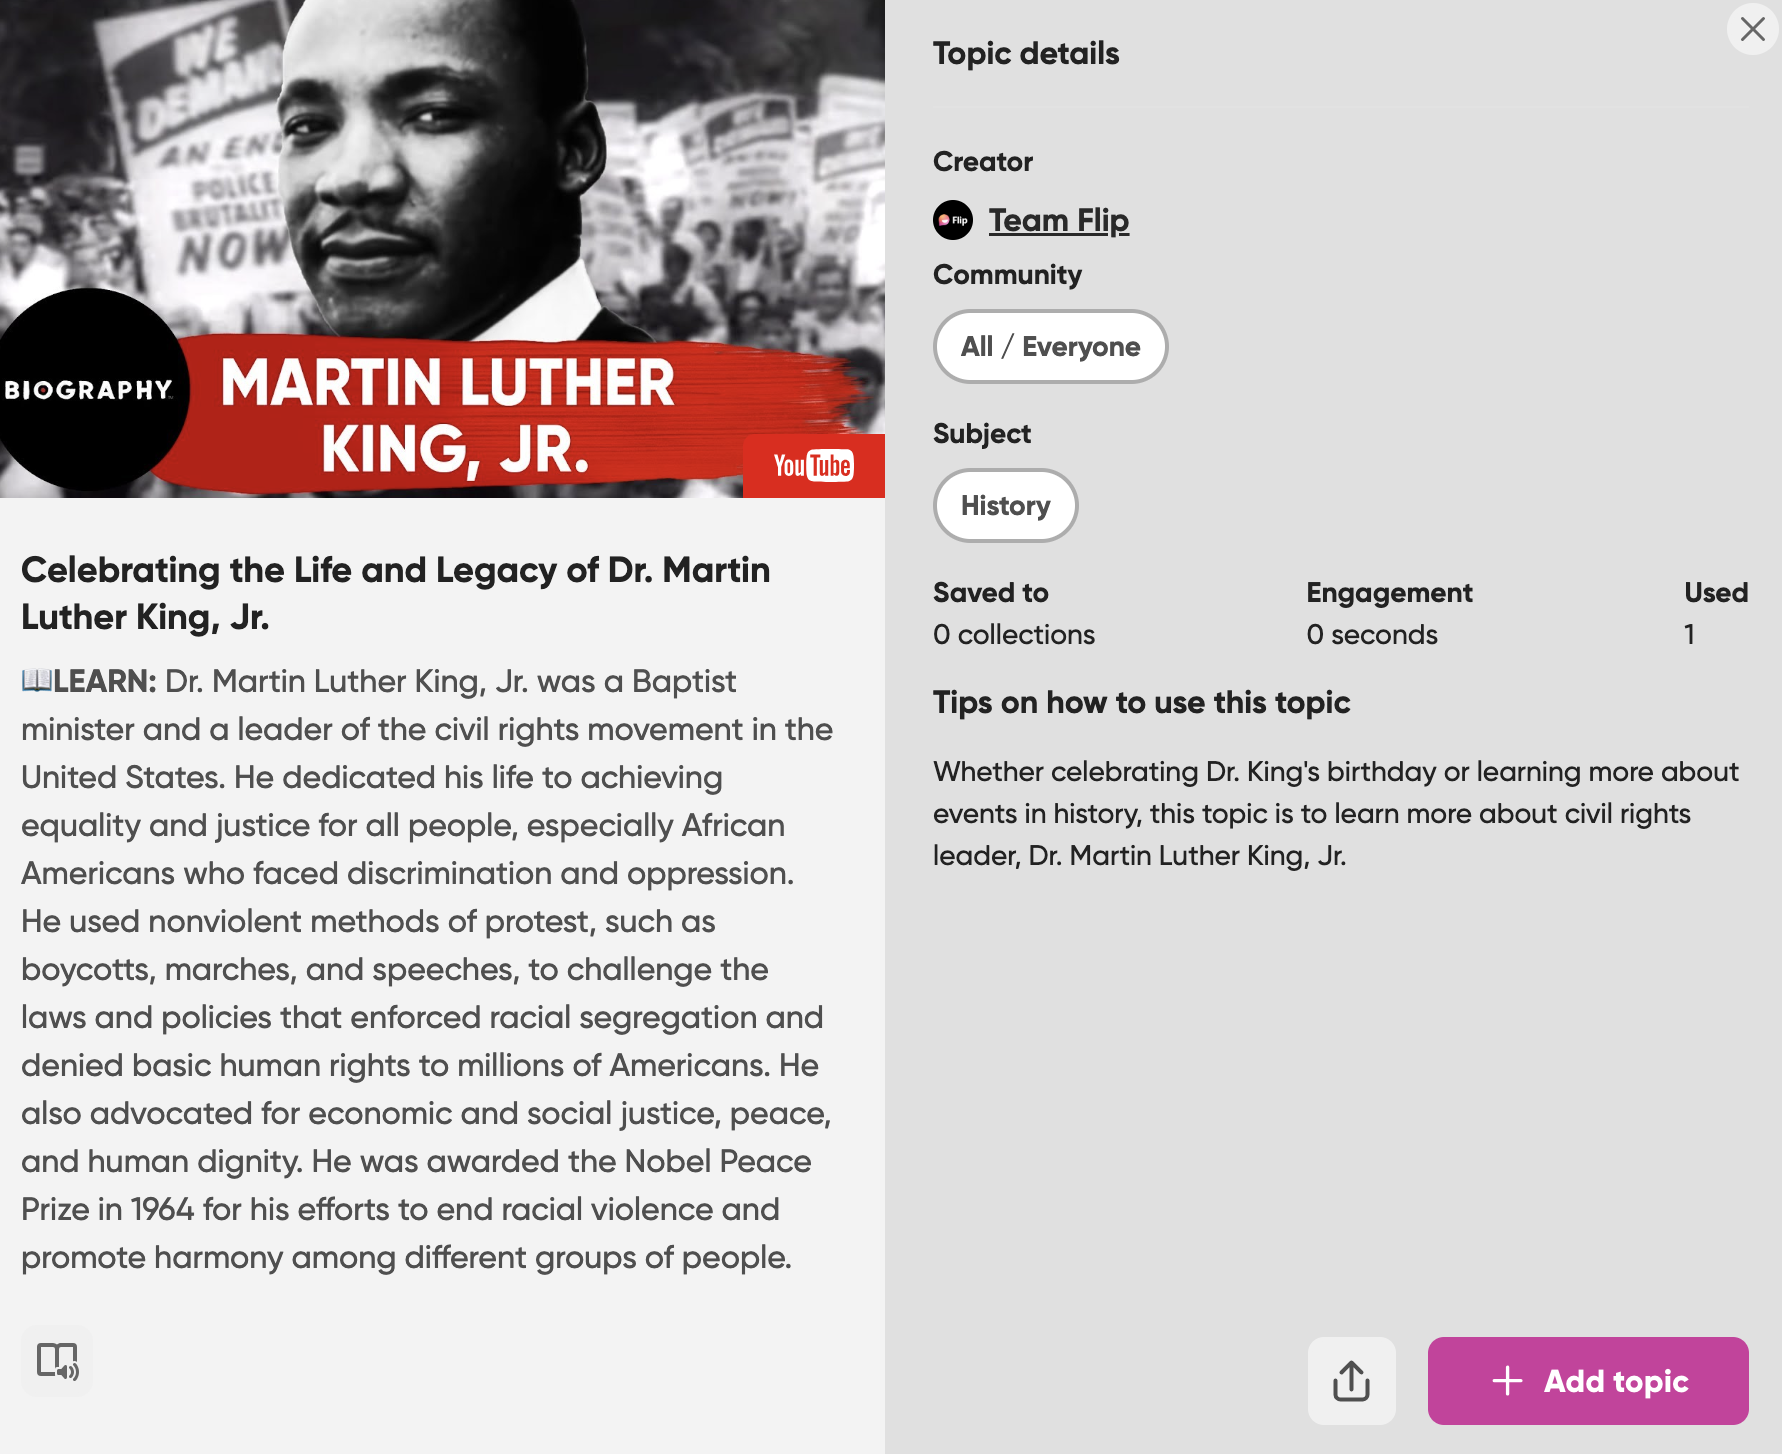 Teacher view of the “Celebrating the Life and Legacy of Dr. Martin Luther King, Jr.” discussion topic in Flip.